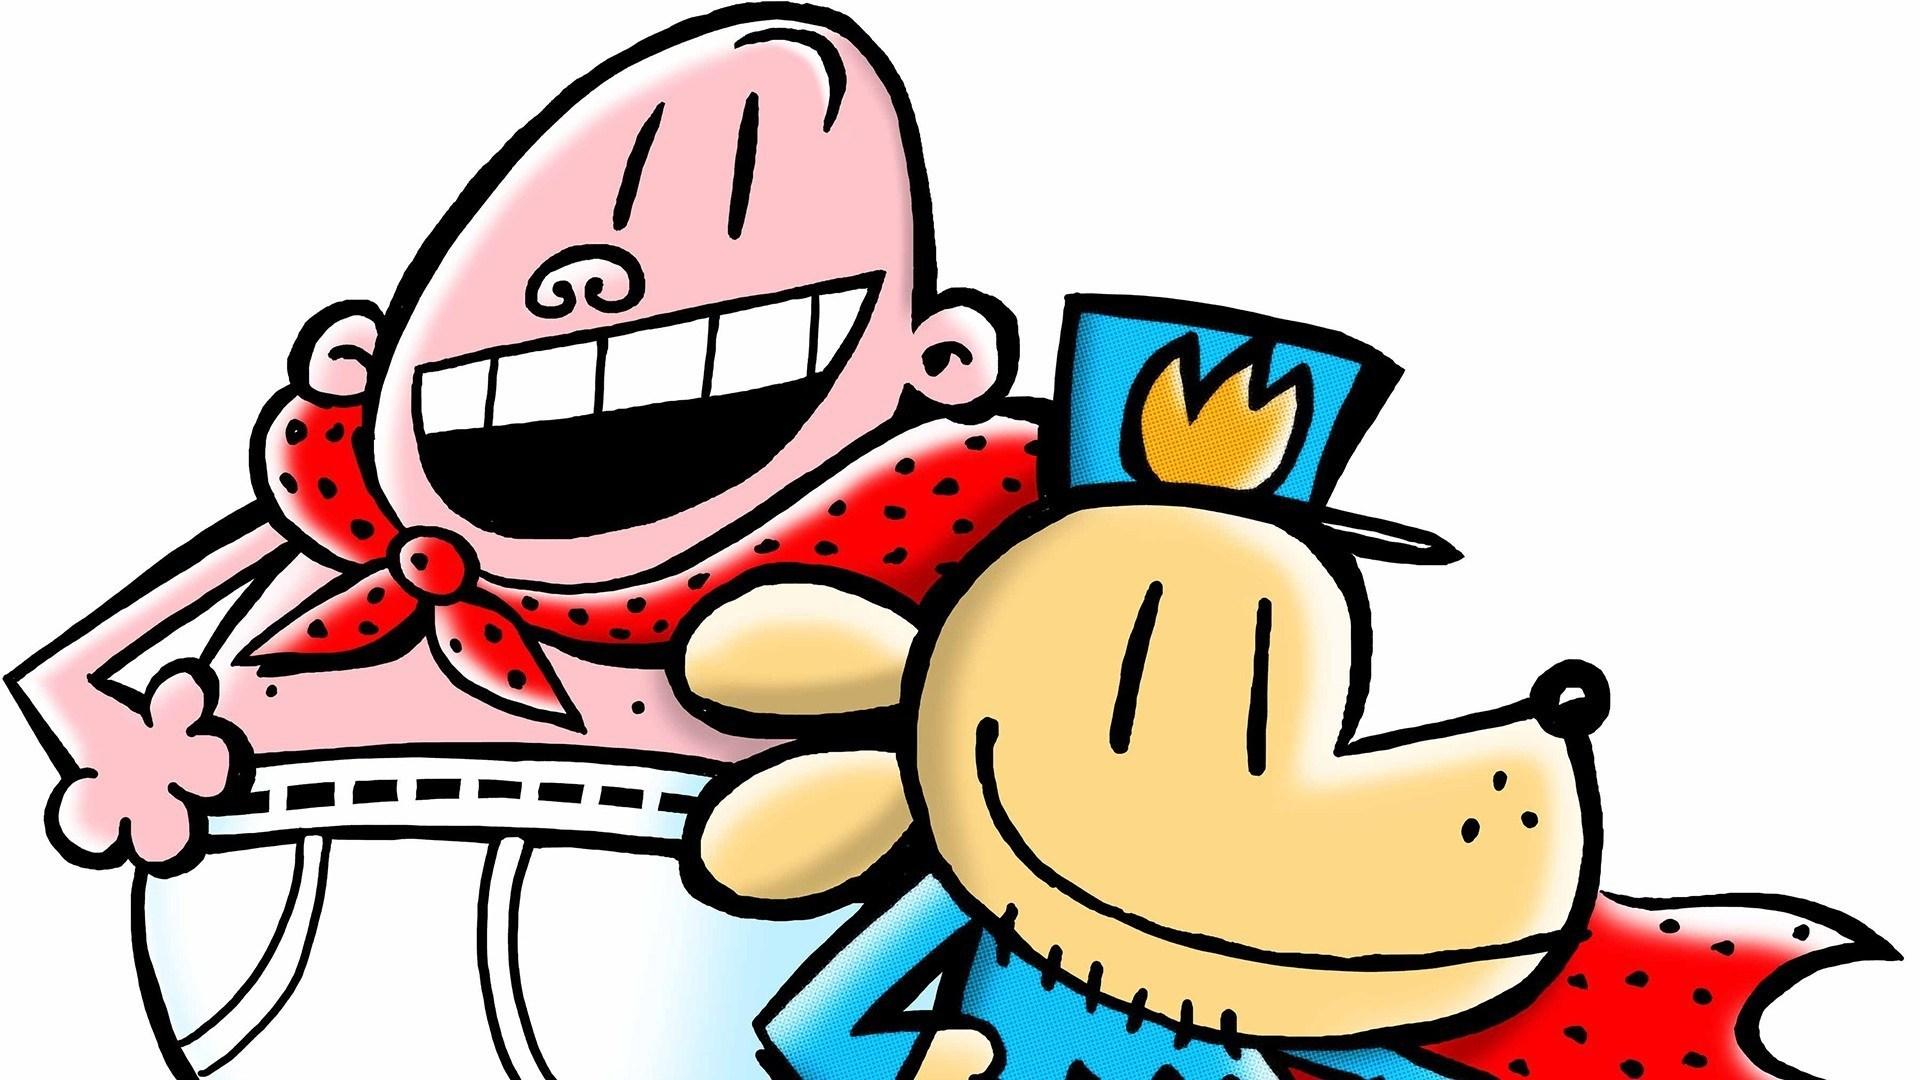 Captain Underpants & Dog Man: the saviors of the reluctant reader